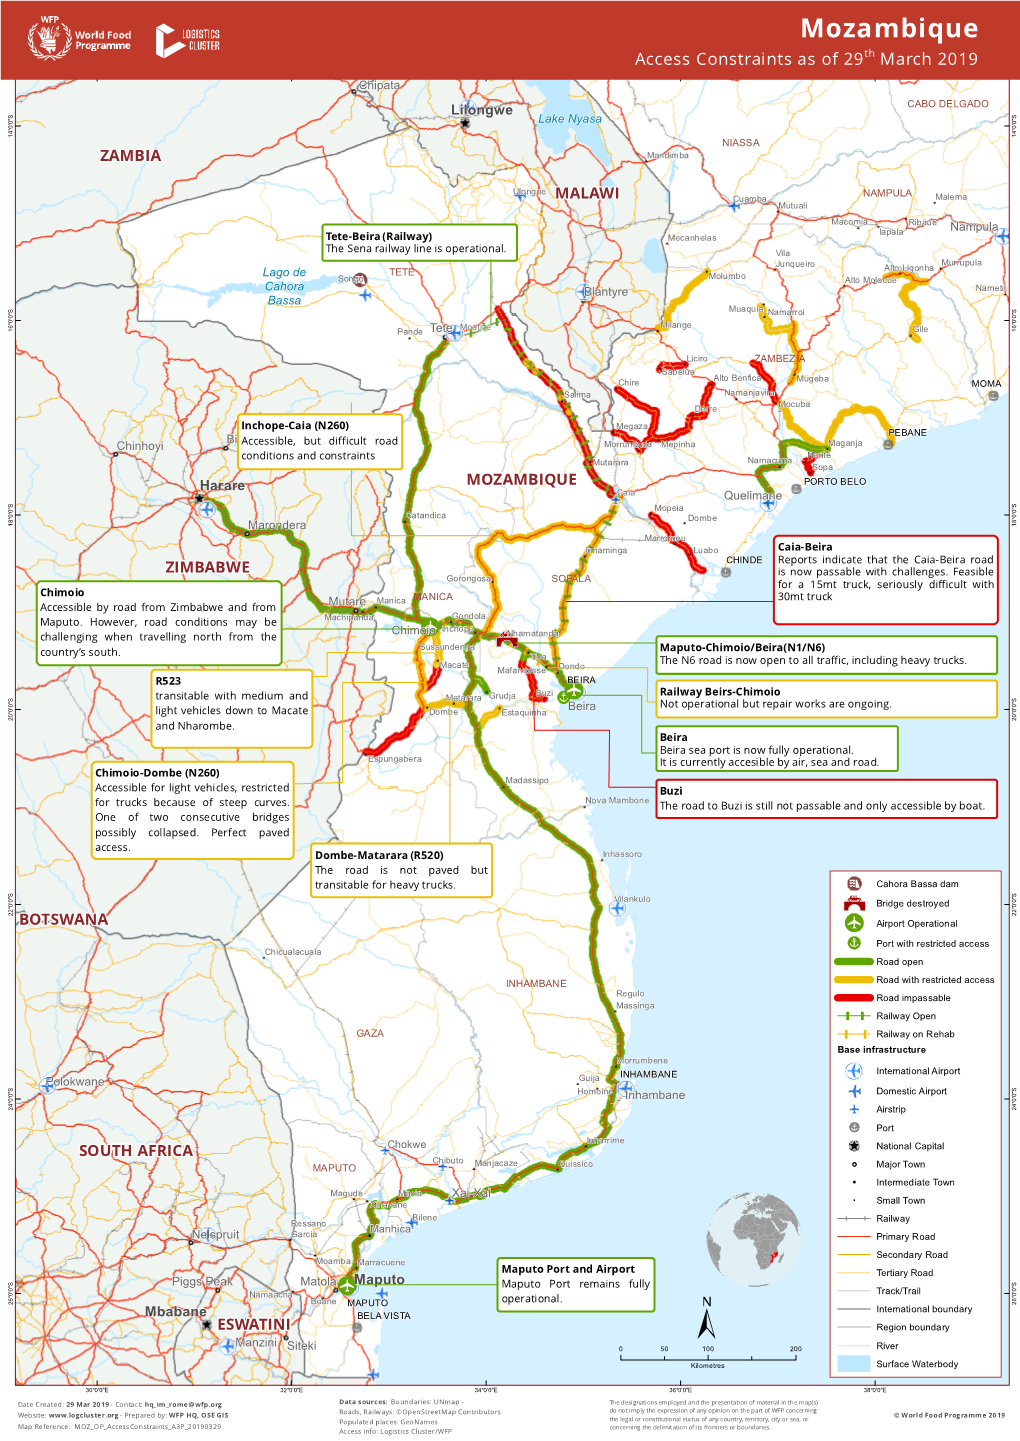 Mozambique Acce Ss Constraints As of 29Th March 2019 Chipata CABO DELGADO S S